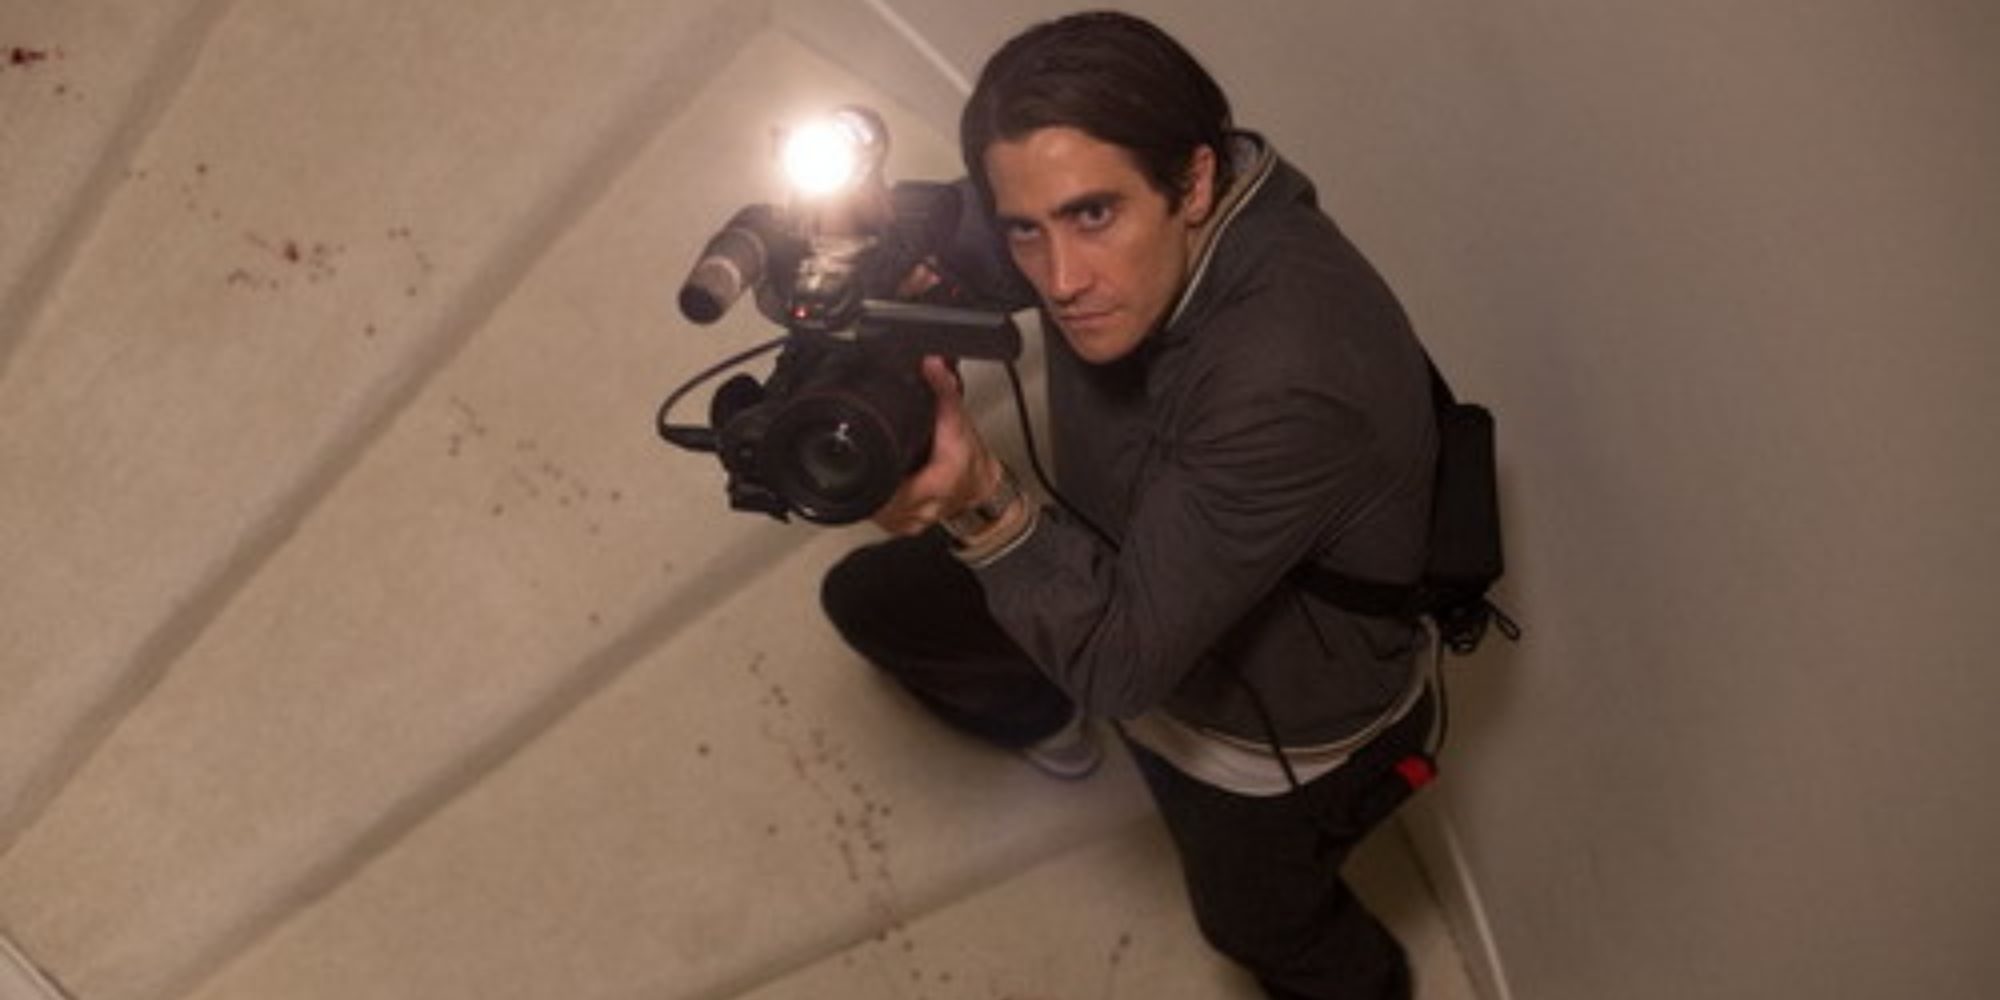 Jake Gyllenhaal as Lou Bloom carrying his camera up the stairs in Nightcrawler